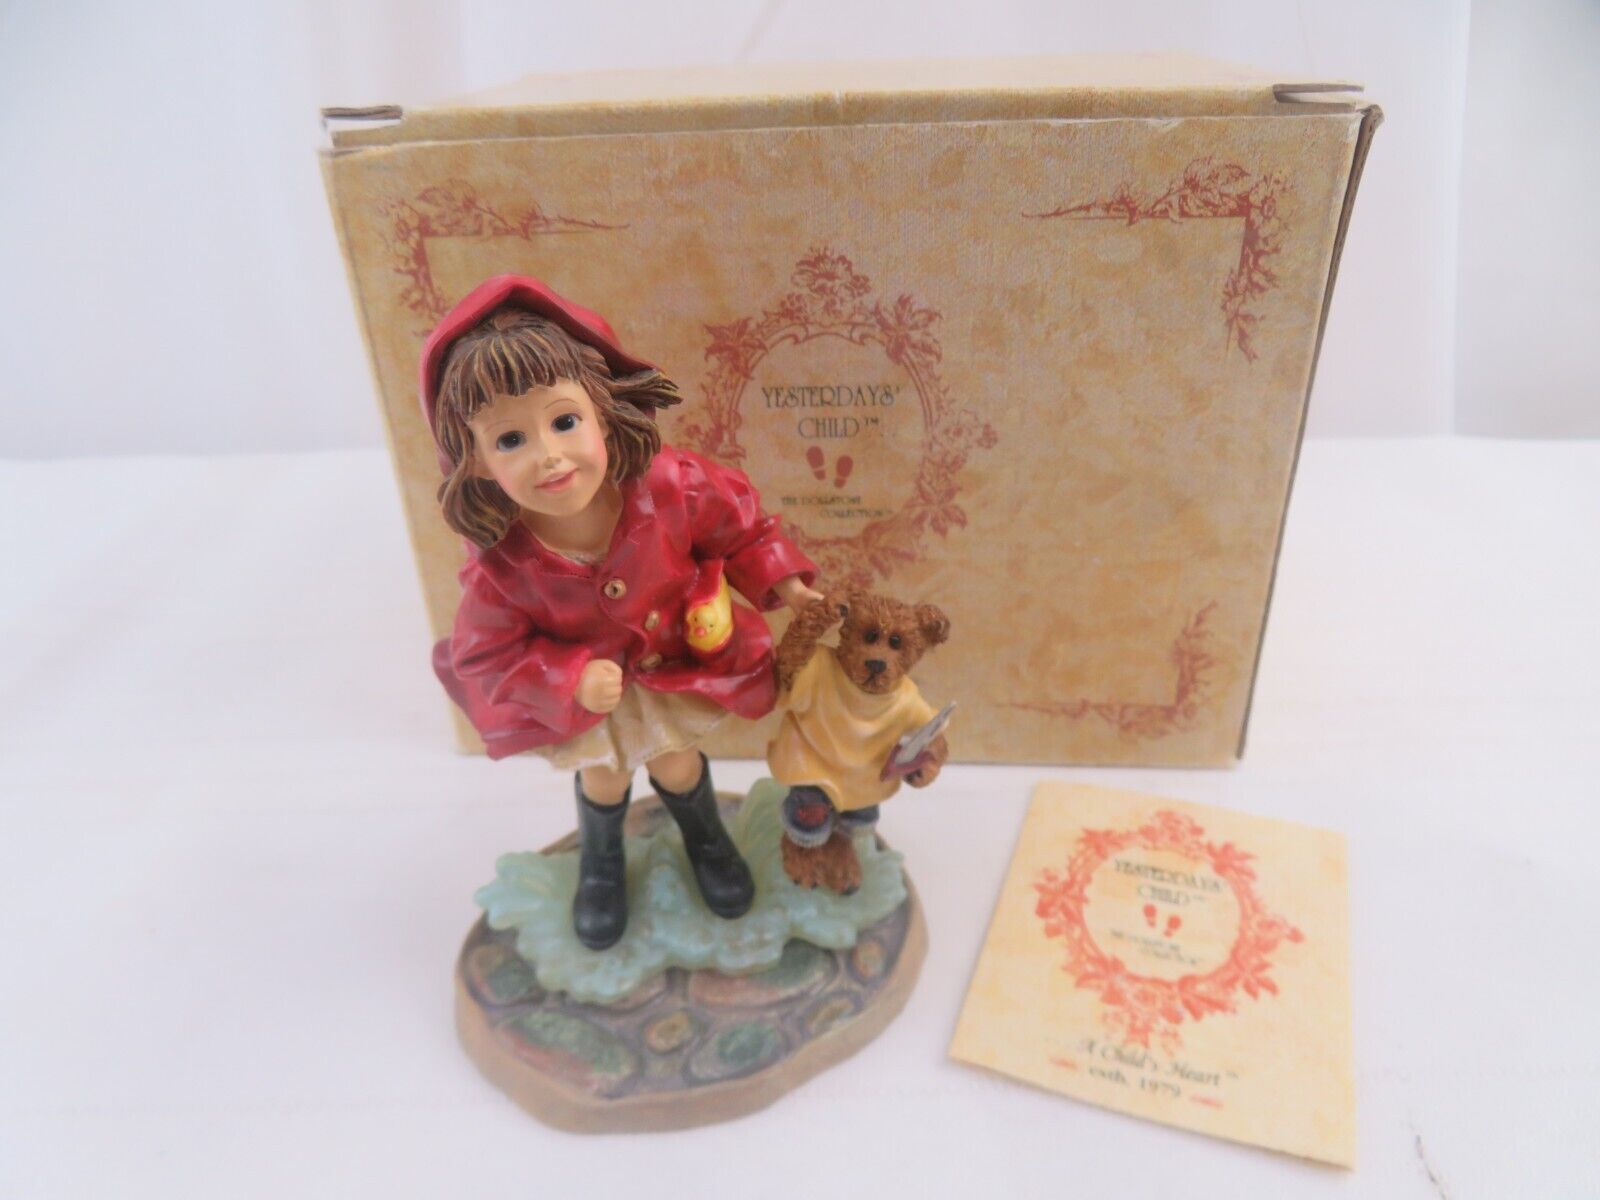 Boyds Bears Yesterdays Child The Dollstone Collection “Puddle Jumpers”